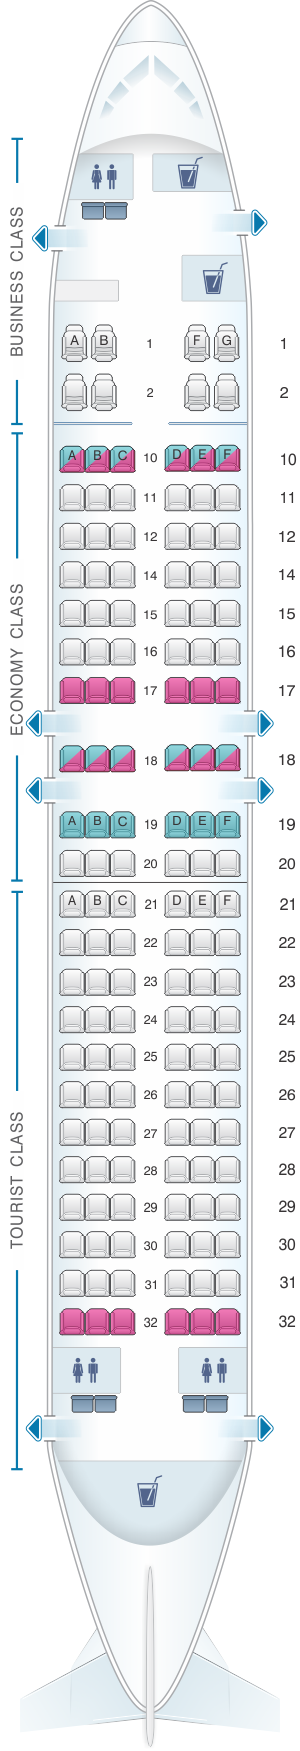 Seat map for Transaero Airlines Boeing B737 400